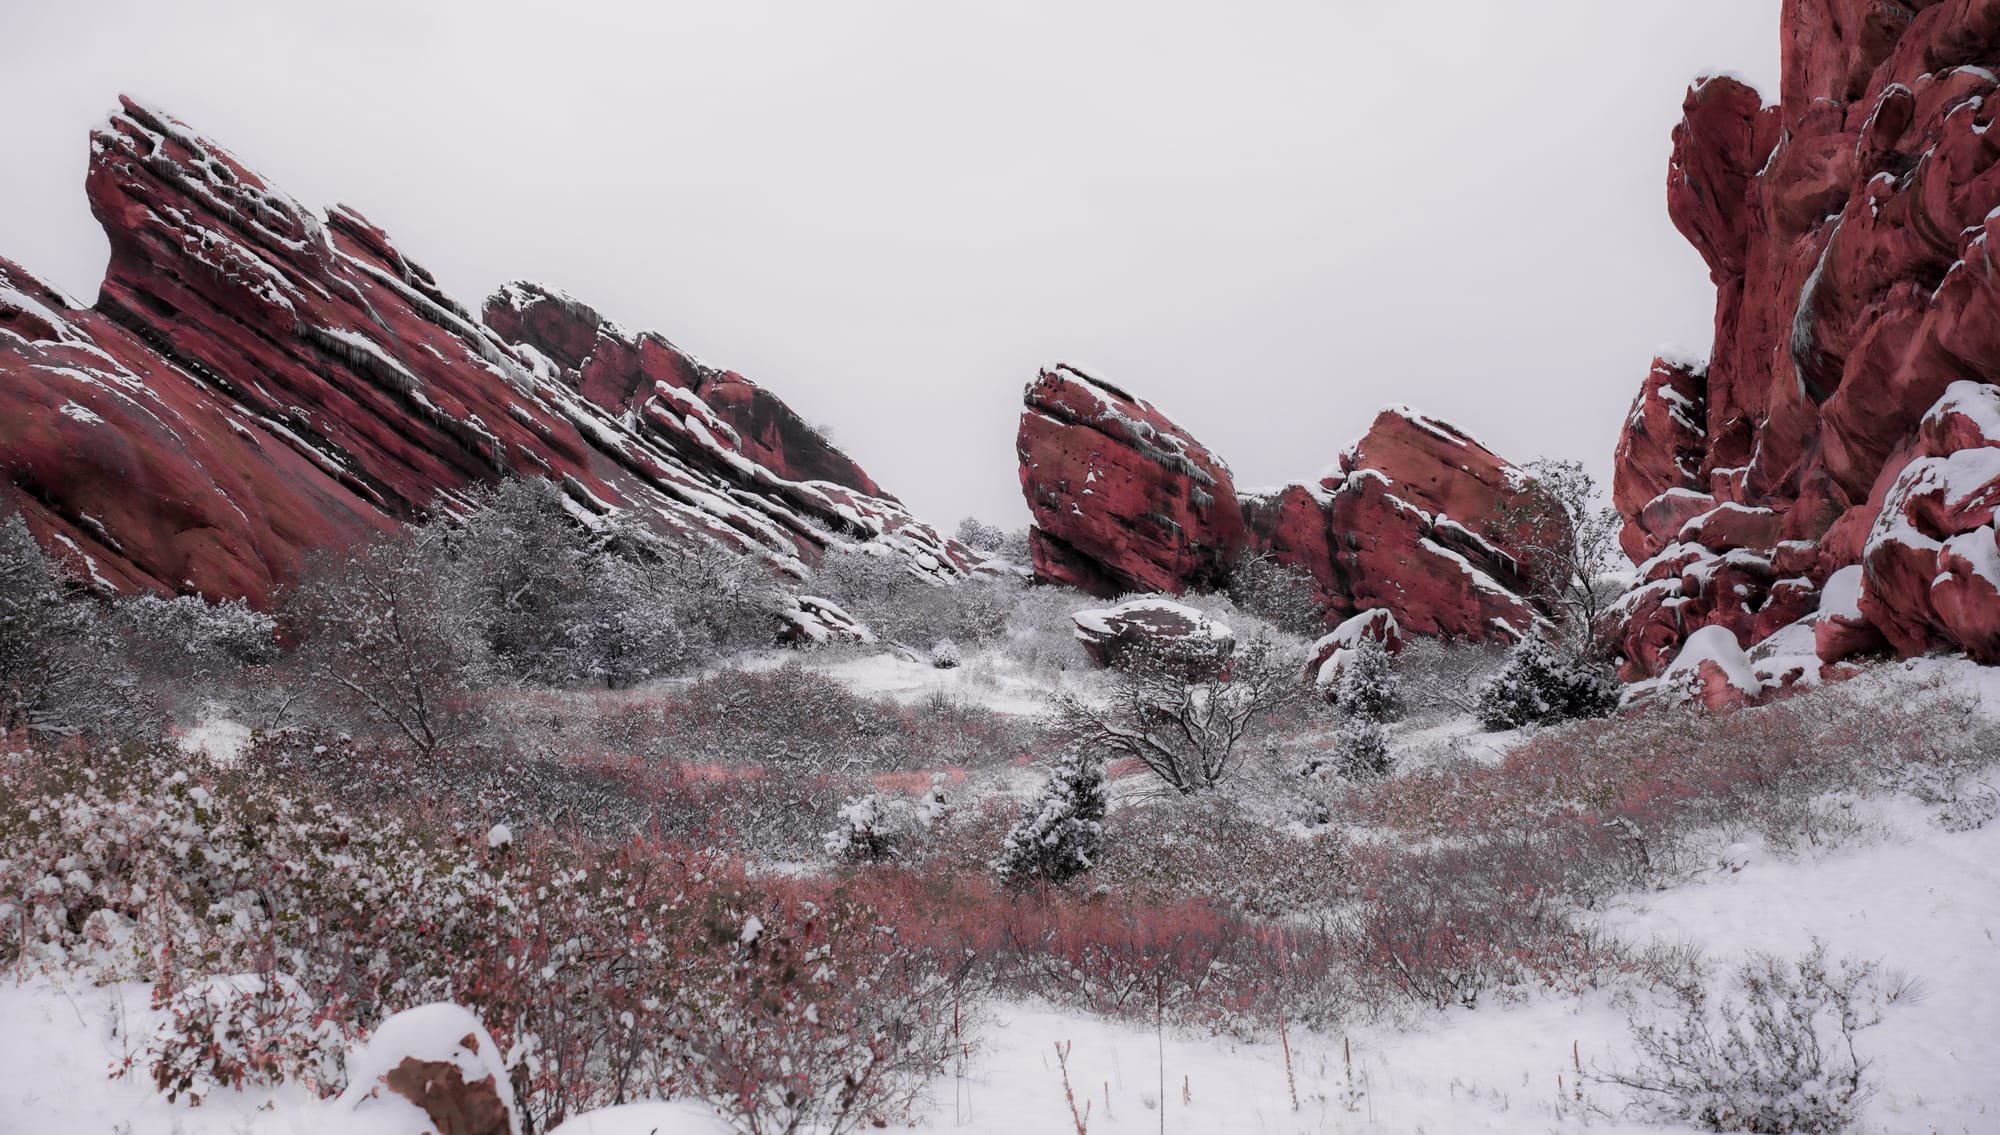 Winter's Preview at Red Rocks